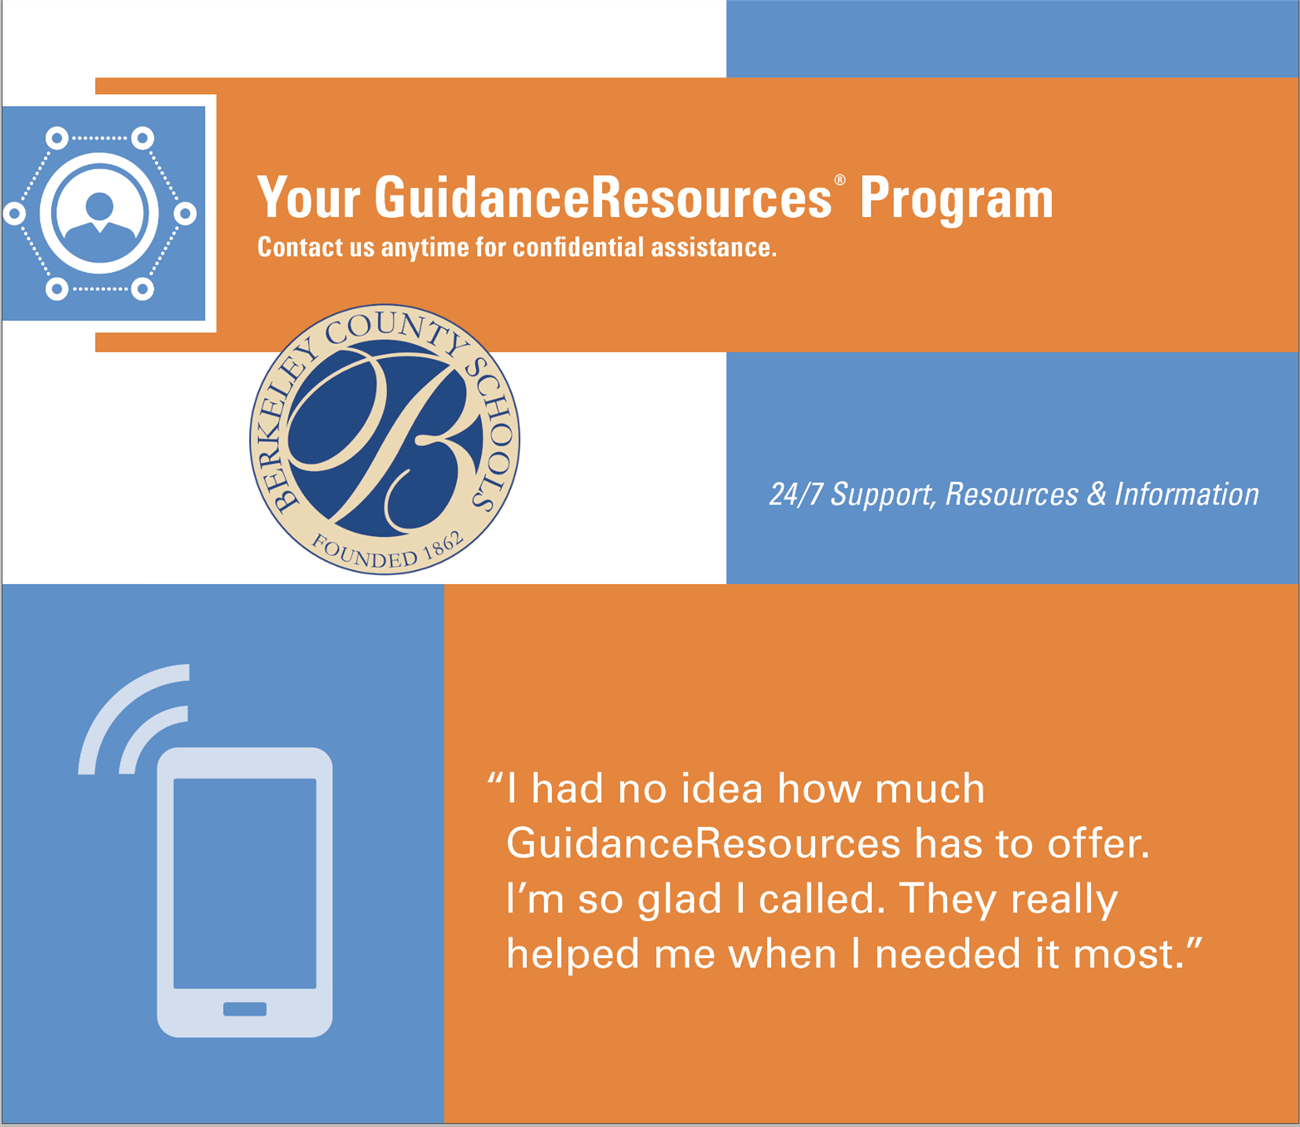 Your GuidanceResources* Program Contact us anytime for confidential assistance. 24/7 Support, Resources & Information "I had no idea how much GuidanceResources has to offer. I'm so glad I called. They really helped me when I needed it most."